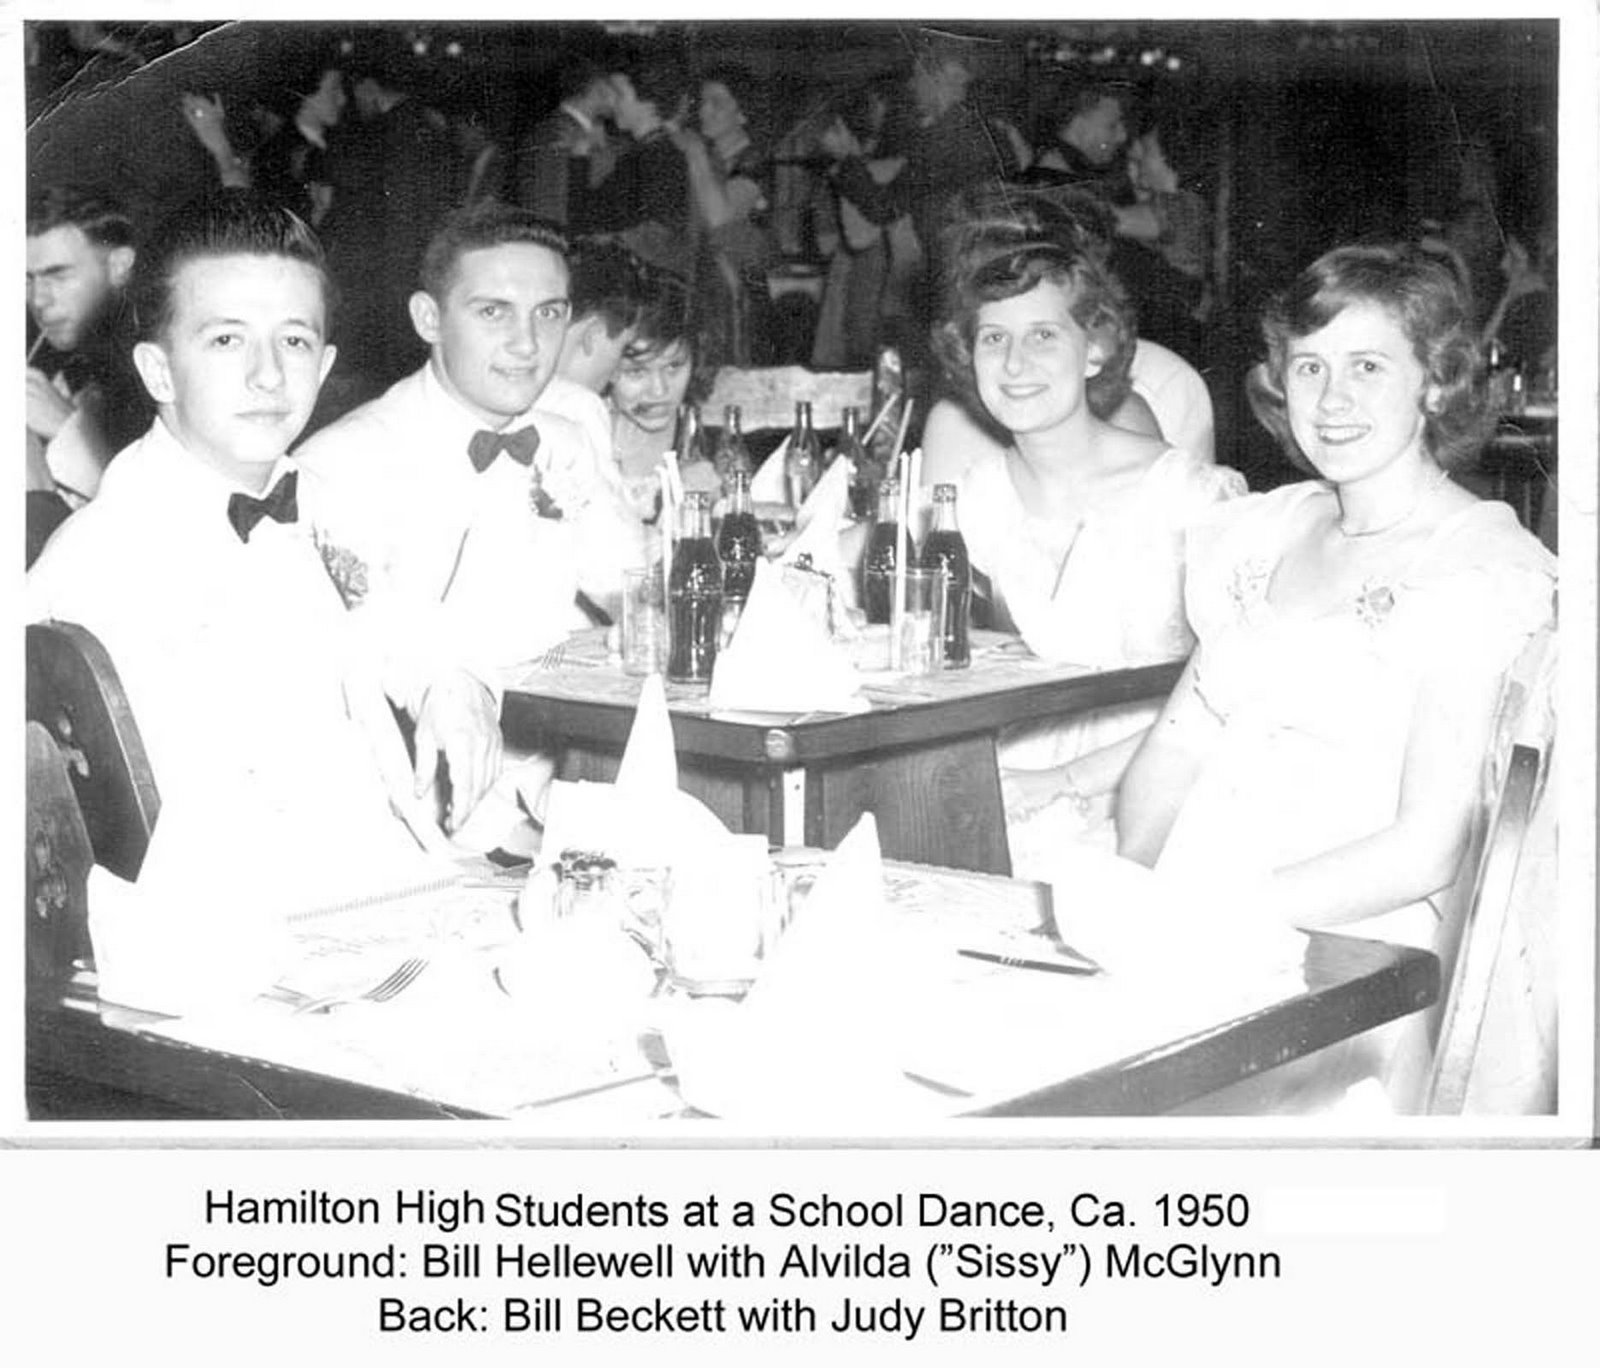 [1950+Ca.+1950+School+Dance+2+Couples+at+a+Table.jpg]